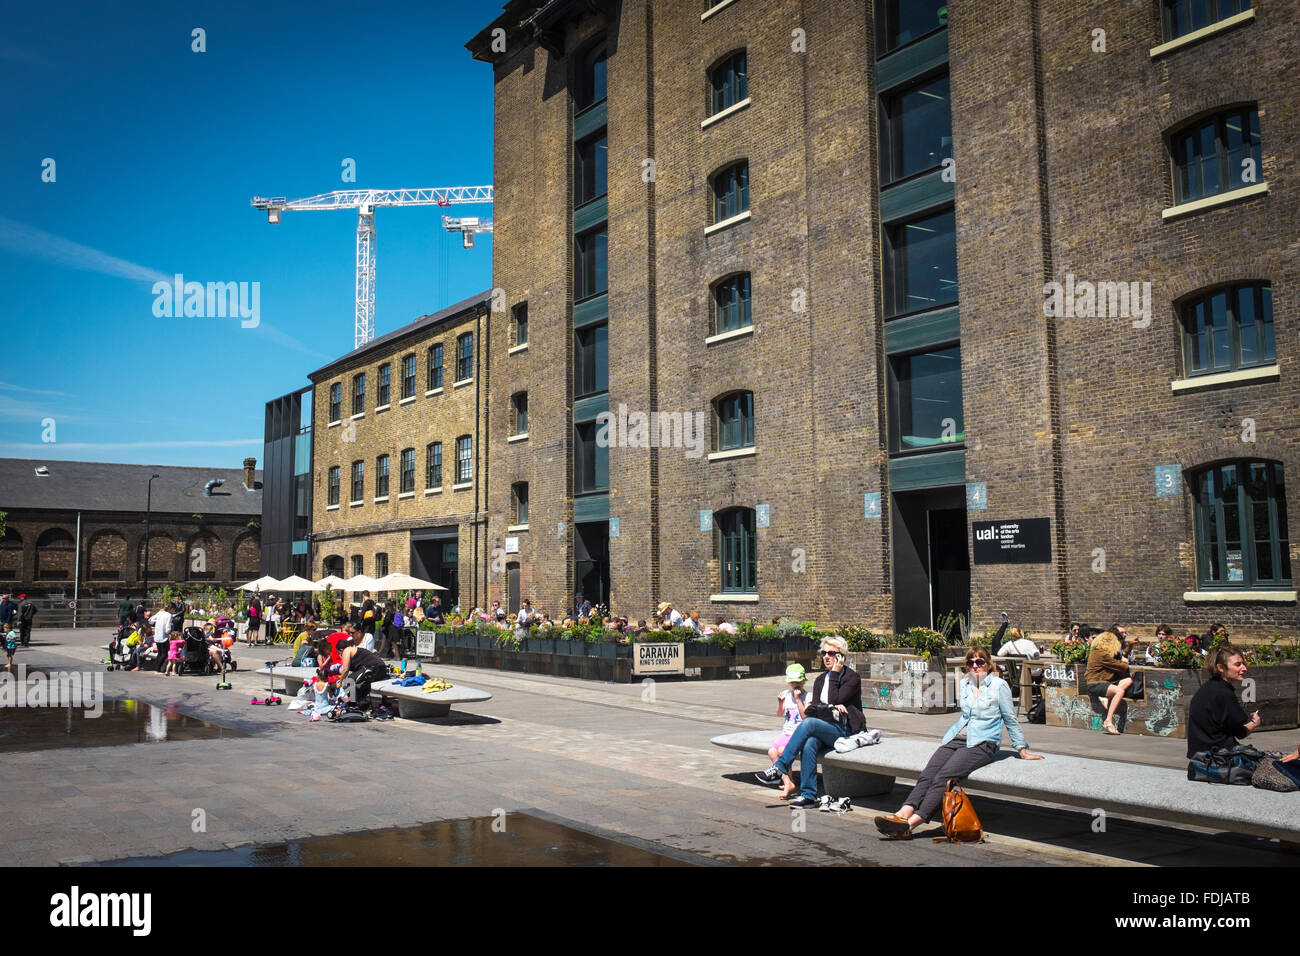 Granary Square, King's Cross, London, UK.  The building in the background is University of Arts London, Central Saint Martins. Stock Photo